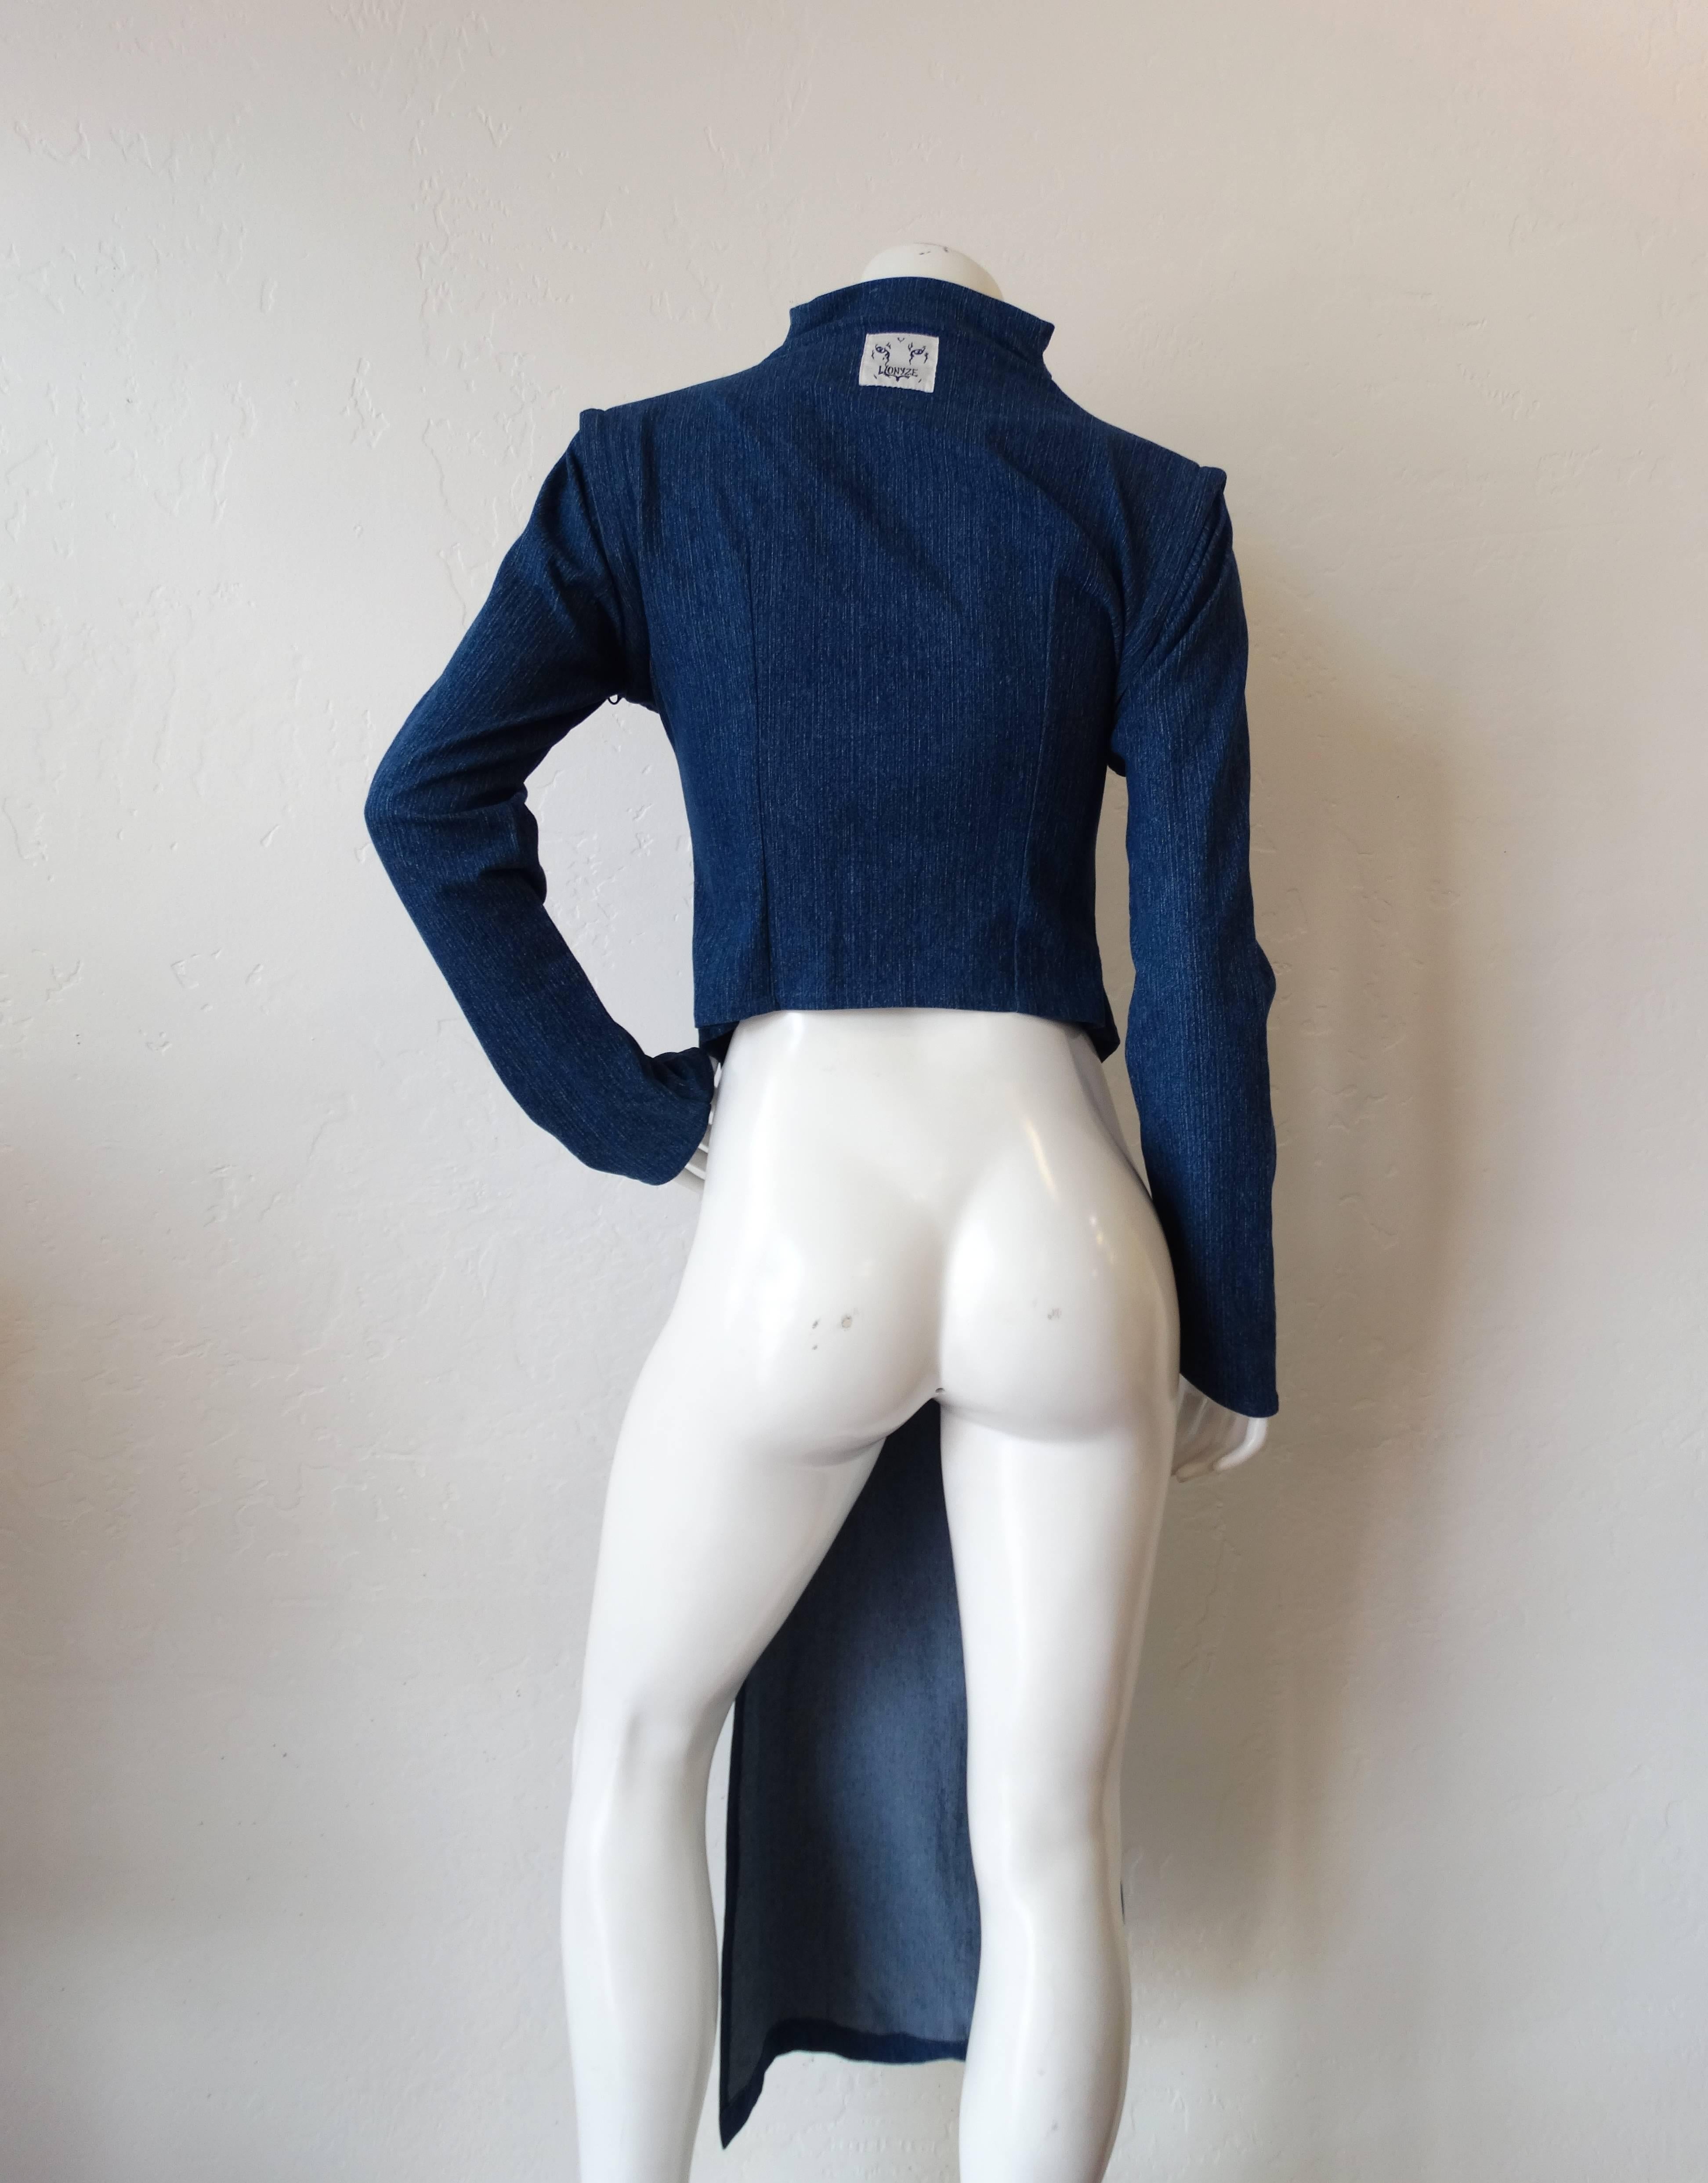 This piece is definitely one of a kind! Interesting Japanese inspired silhouette-
long panel down the front, high neckline and long sleeves. Made of a stretch denim material in a true blue. Front panel and sleeves zip off and detach, allowing for a